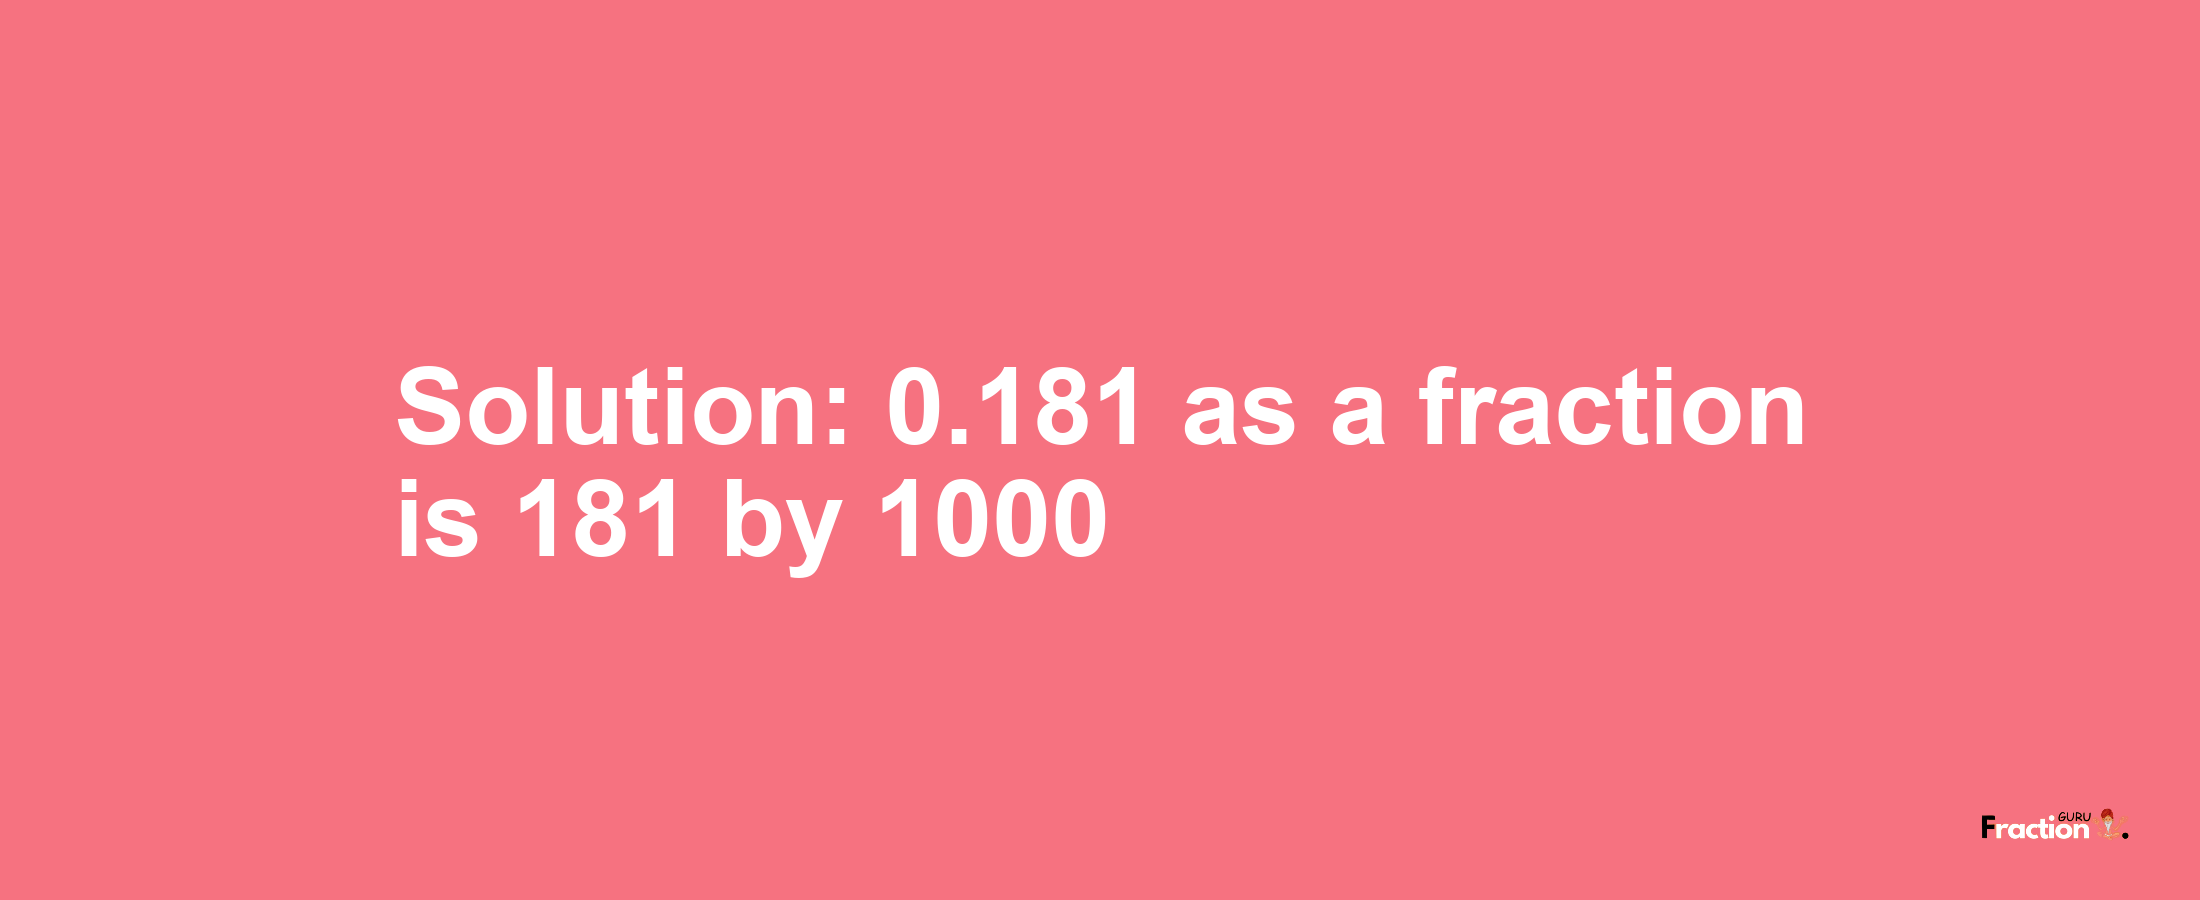 Solution:0.181 as a fraction is 181/1000